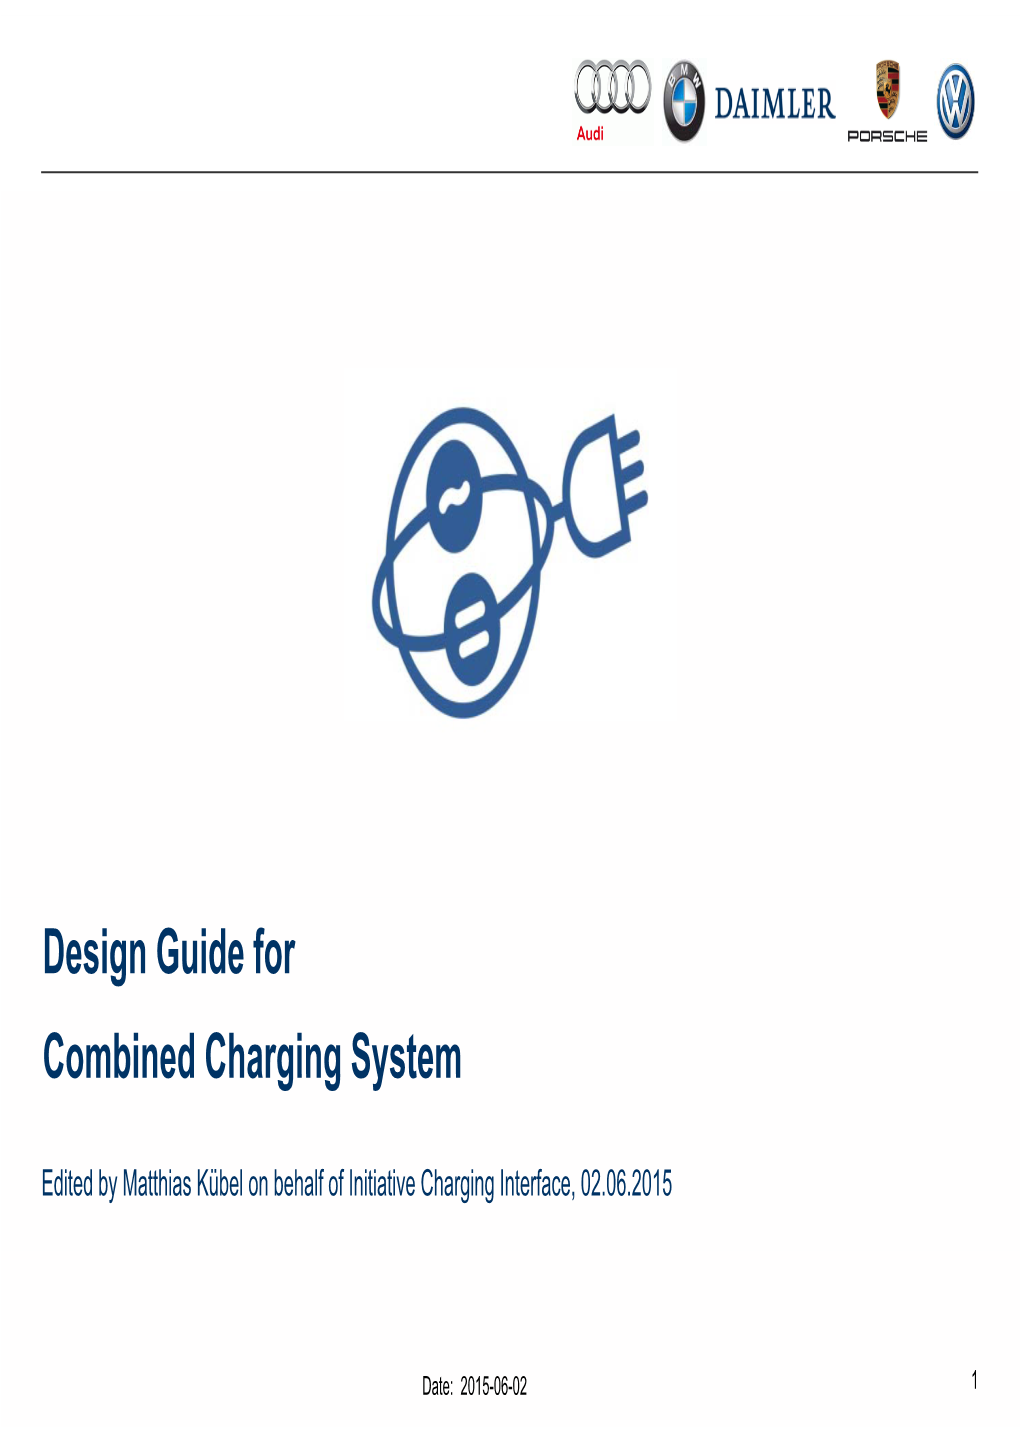 Design Guide for Combined Charging System